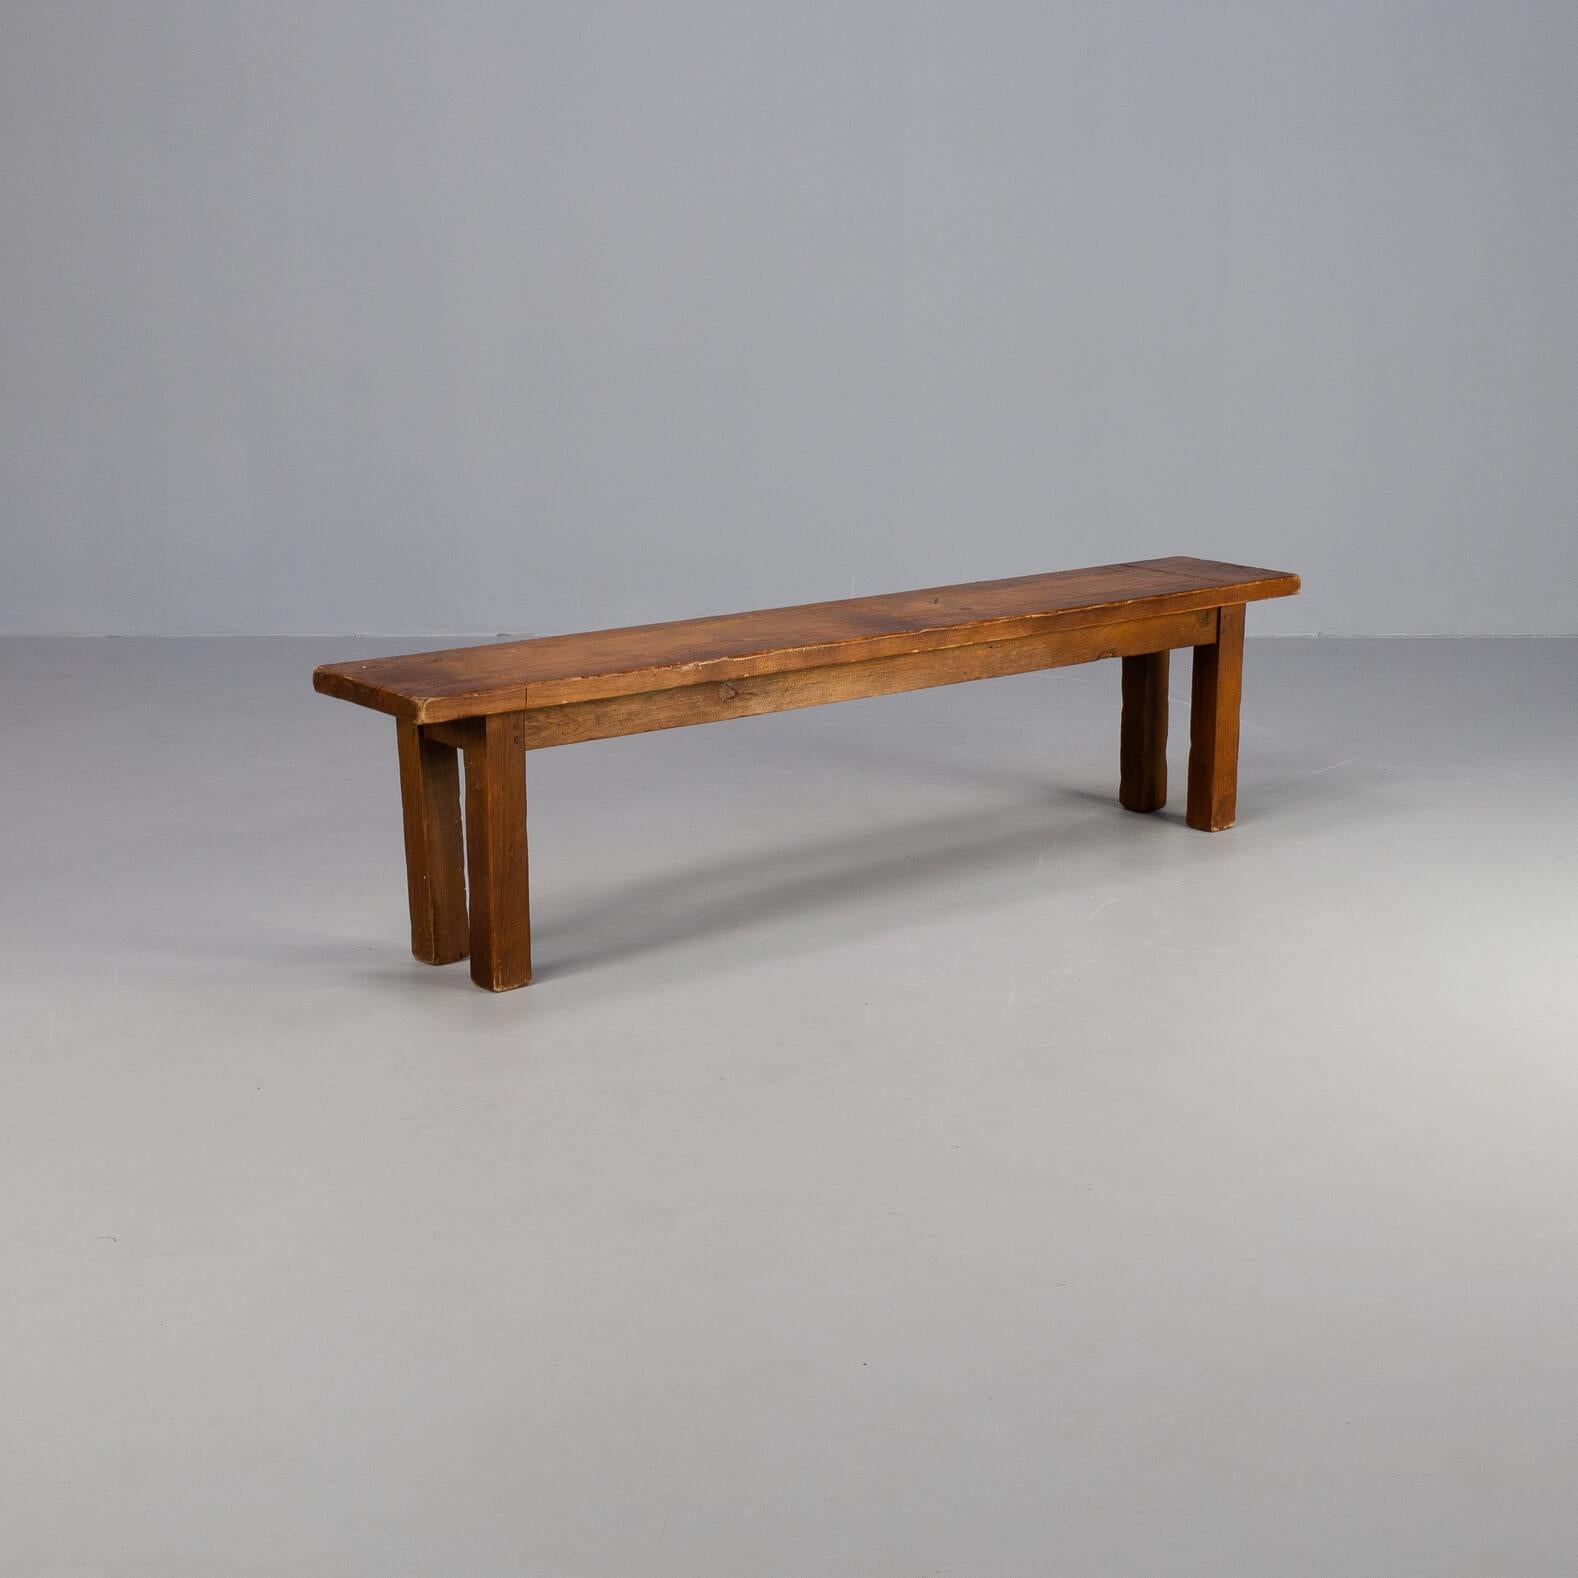 This bench can be directed to the beautiful brutalist cast wood furniture design. It shows its organic shapes and is after all those years still as beautiful as functional. A fine example of timeless design. The bench 180cm and also firm and stable